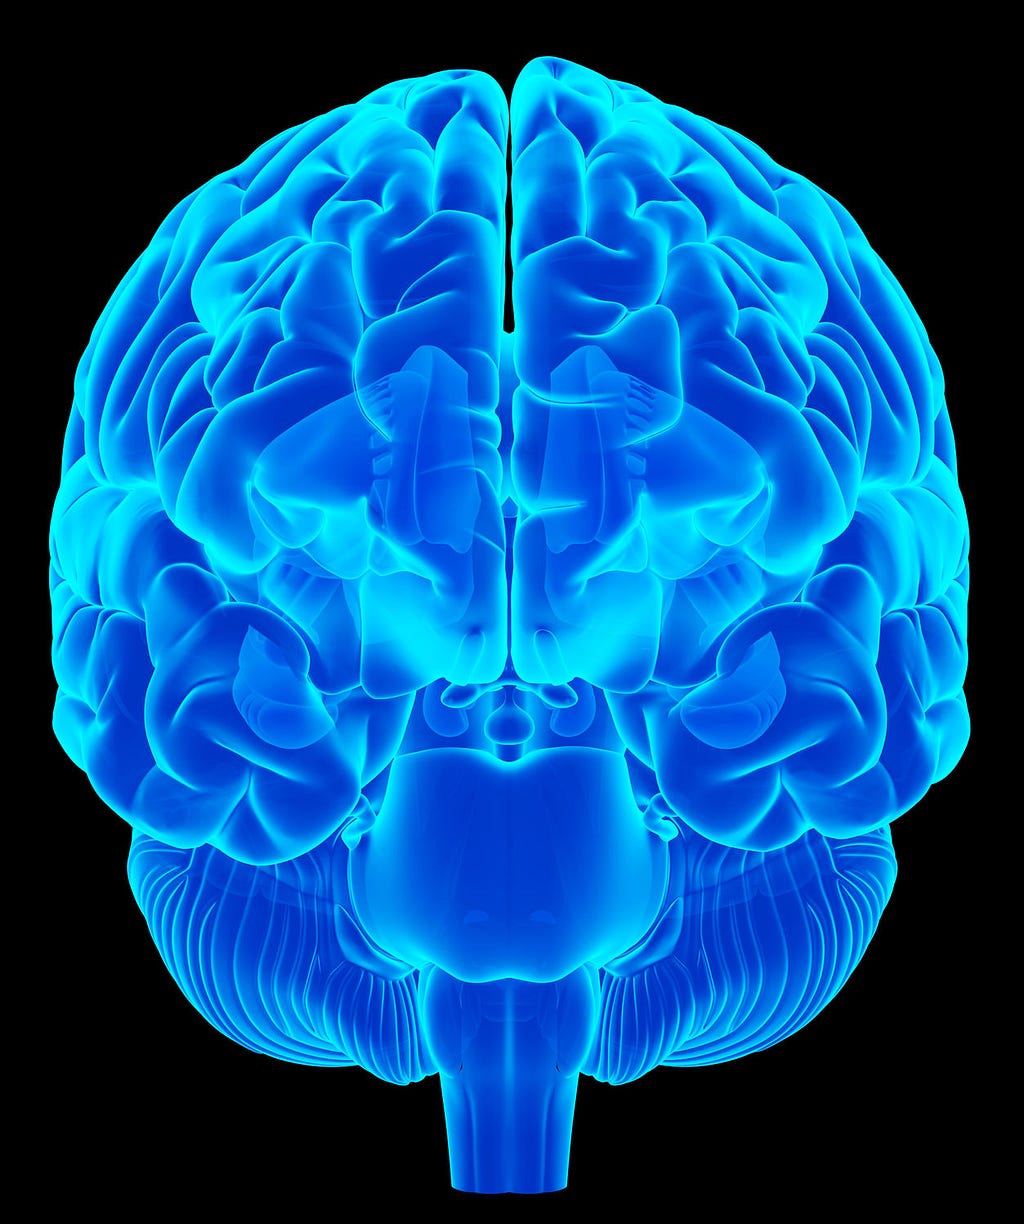 A picture of a transparent brain from the front,  showing the cortex and cerebellum.